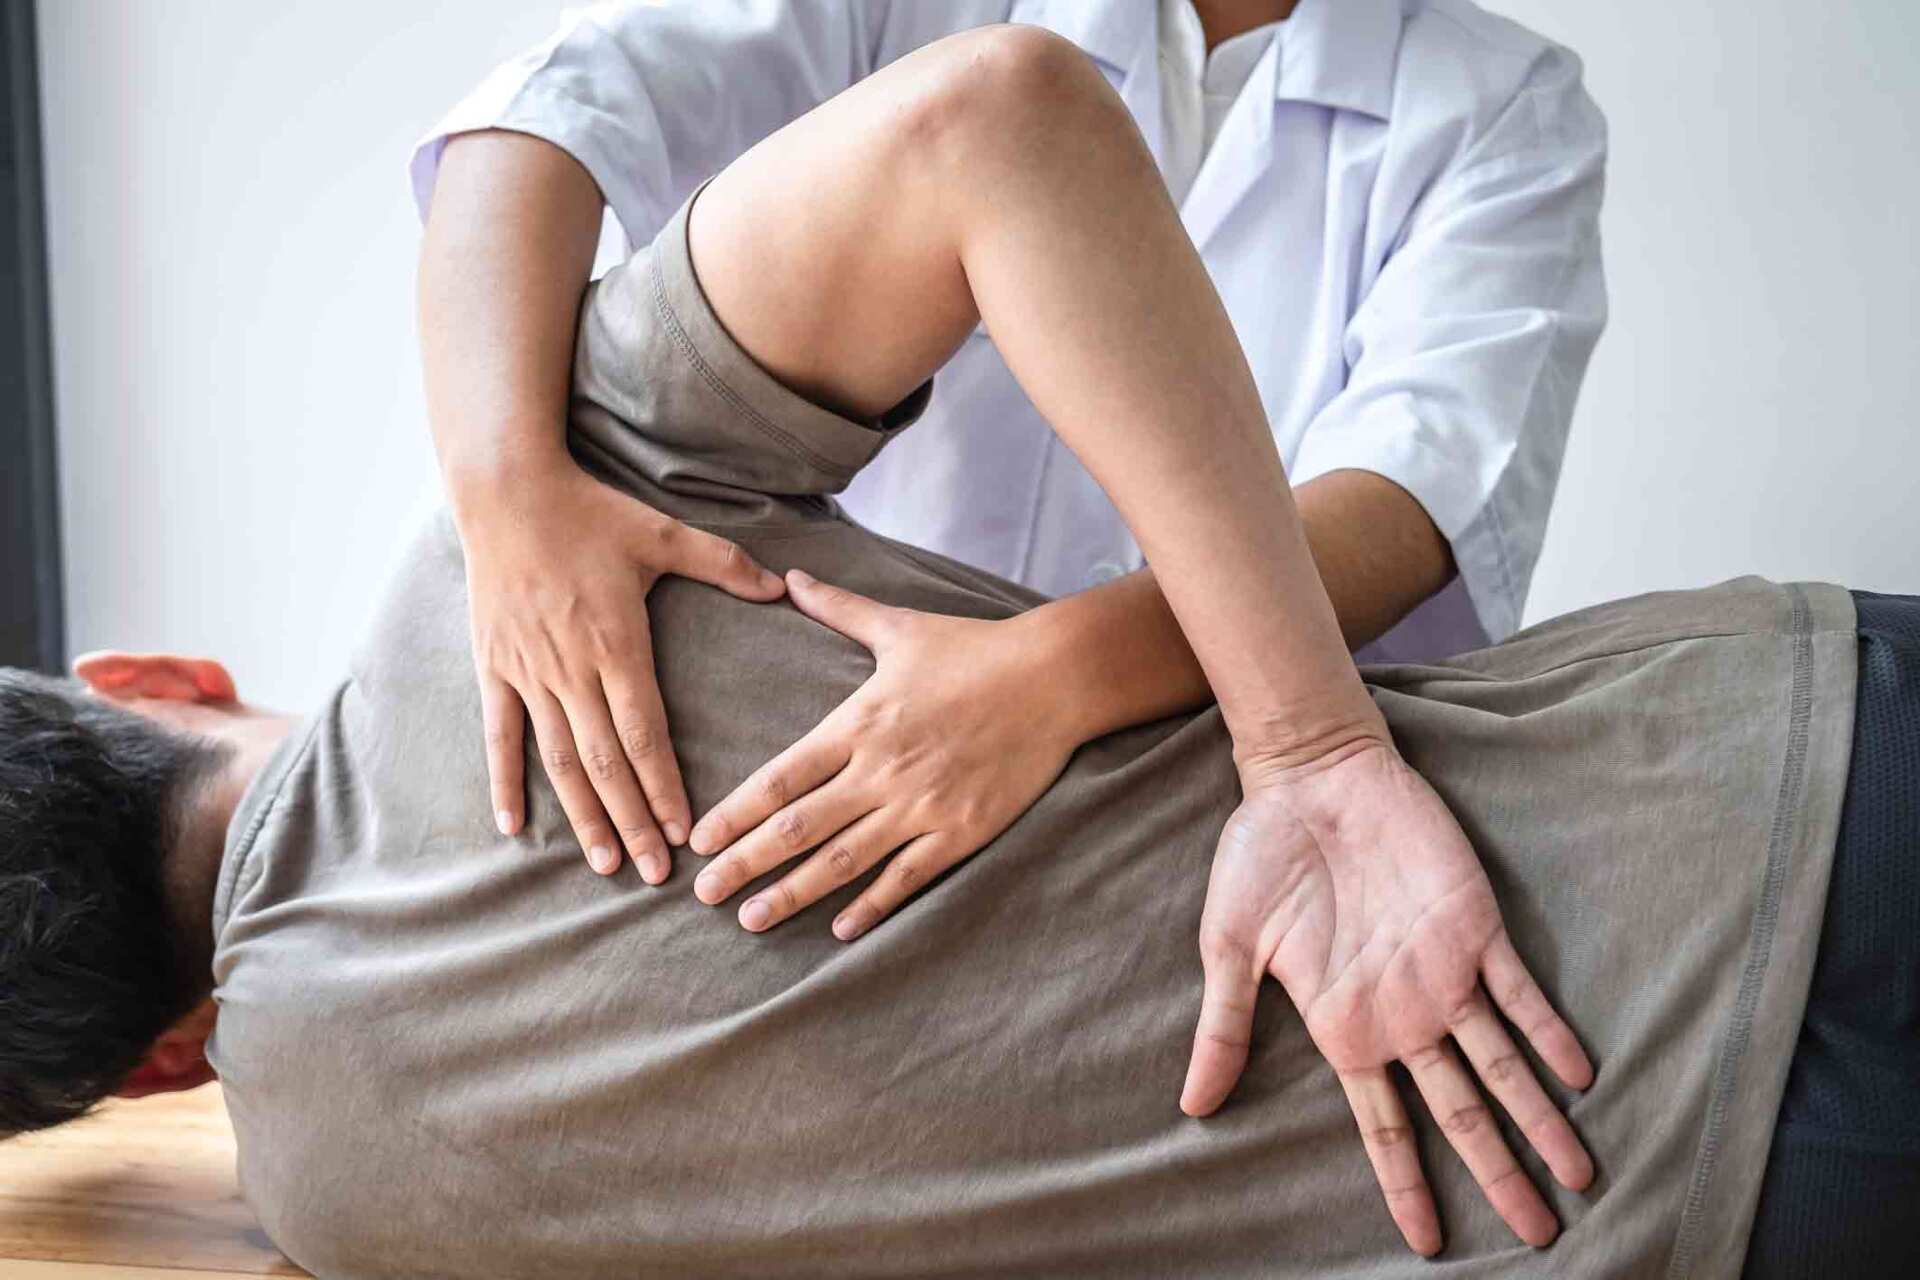 Chiropractor for Lower Back Pain